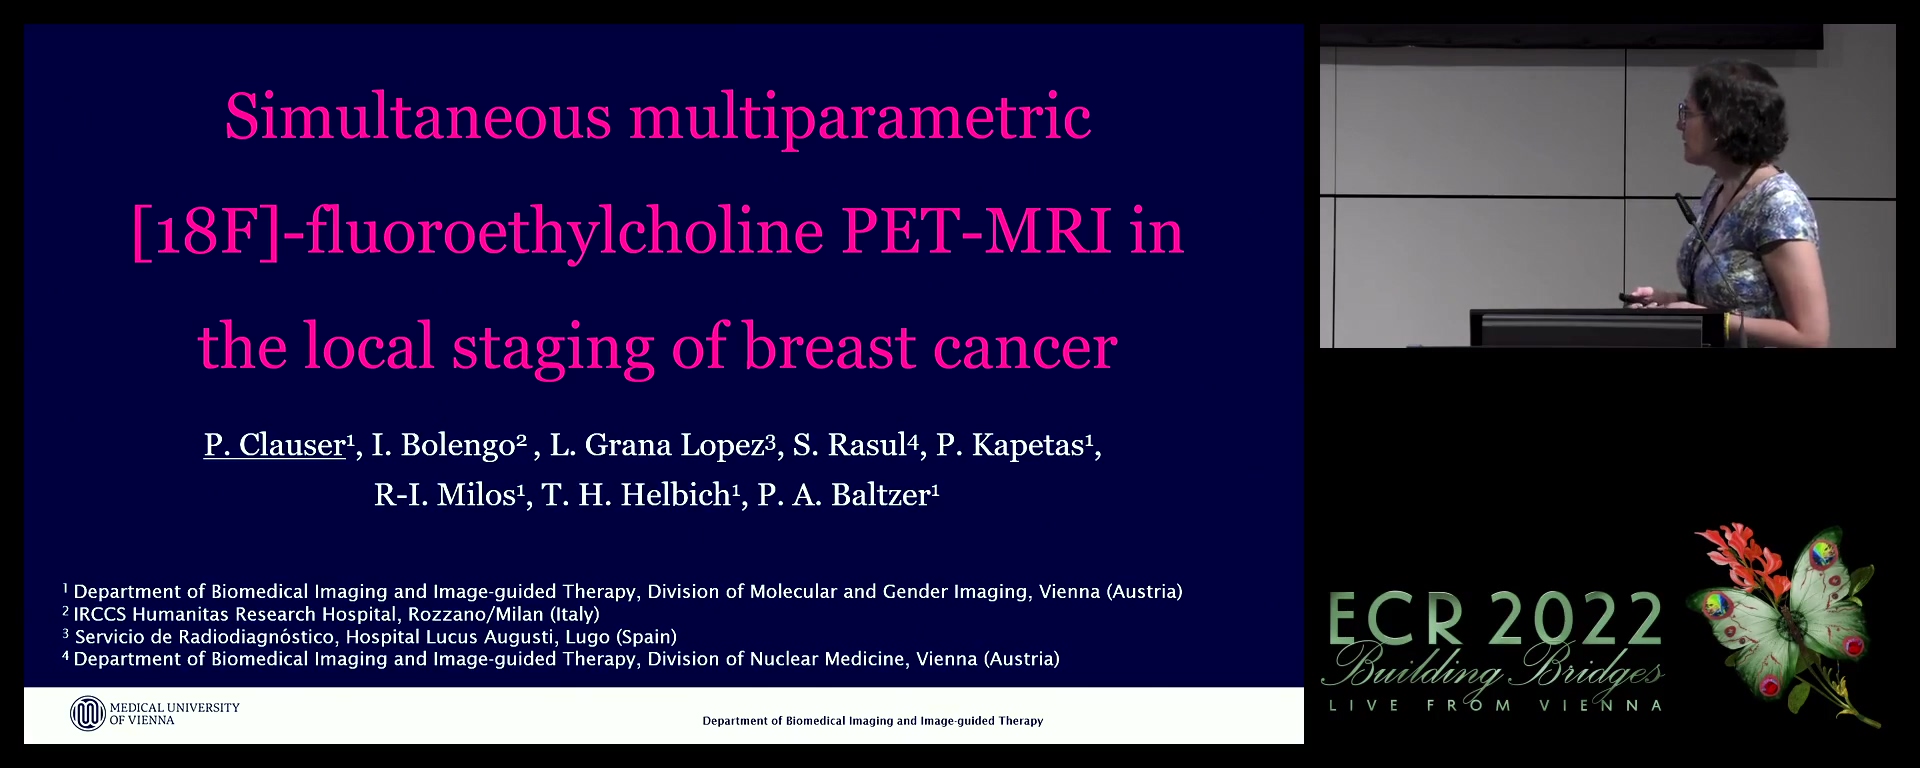 Simultaneous multiparametric [18F]-fluoroethylcholine PET-MRI in the local staging of breast cancer